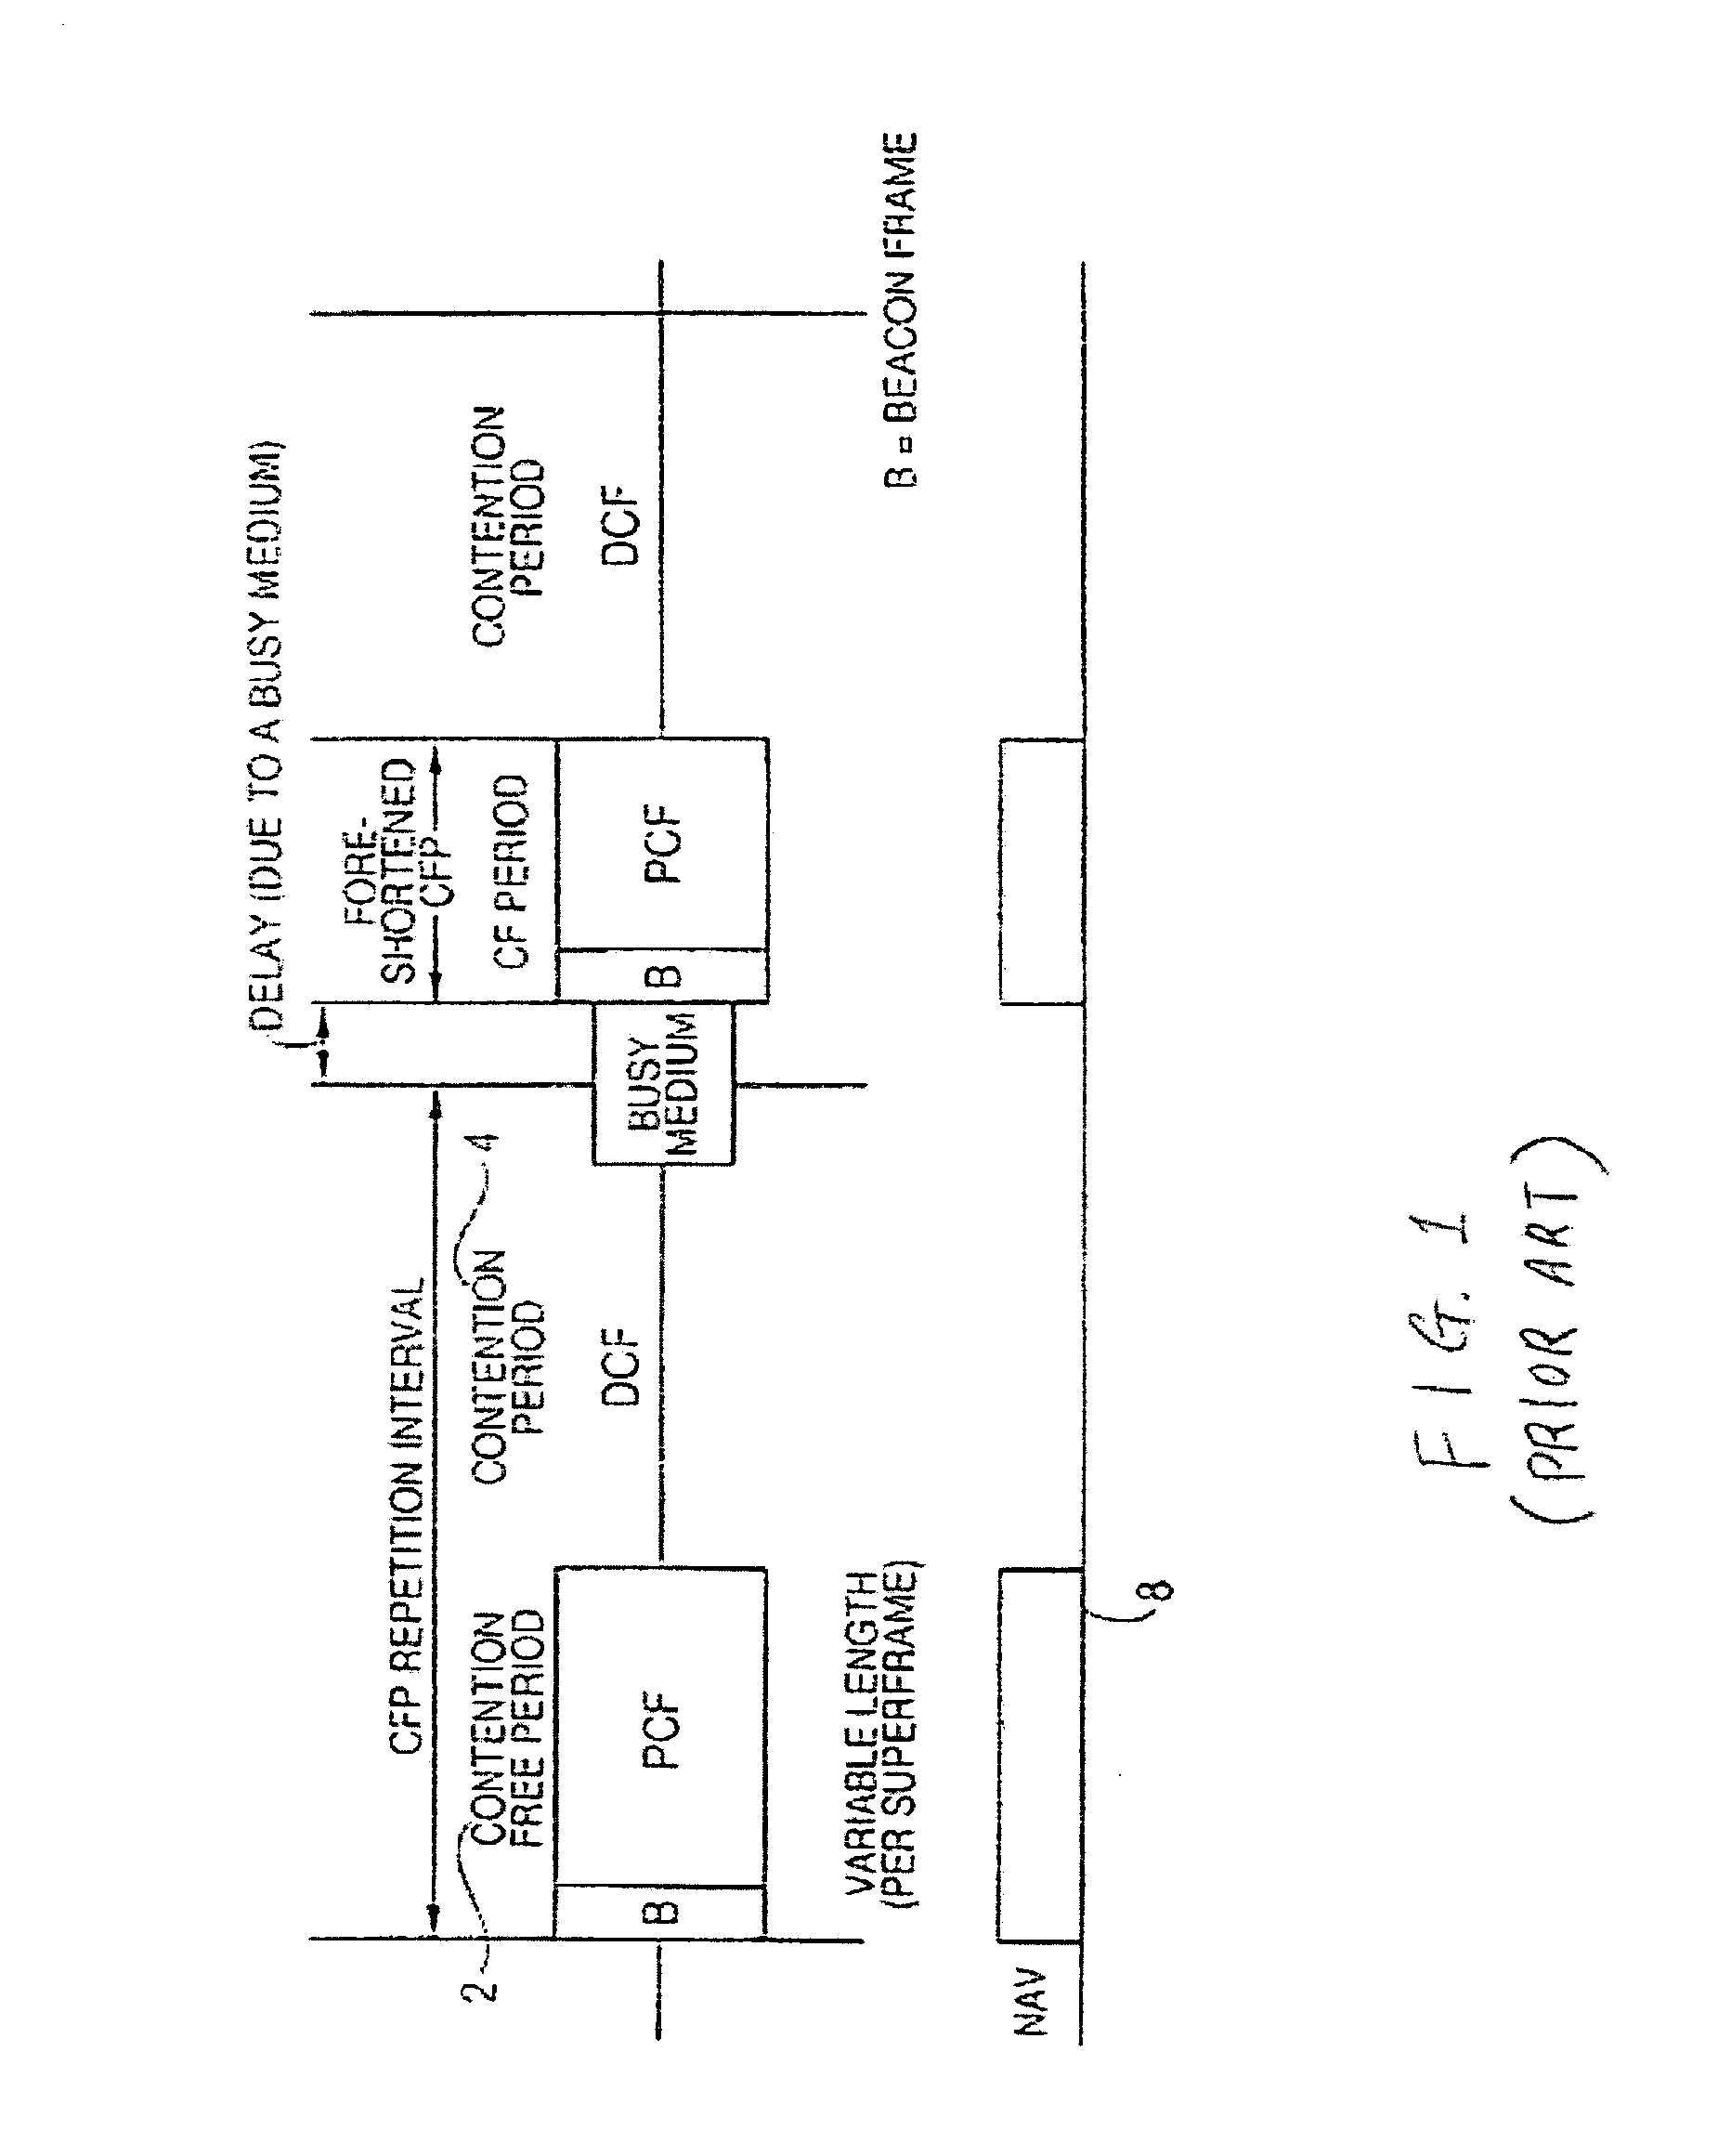 Methods and systems for providing priority access to 802.11 endpoints using DCF protocol